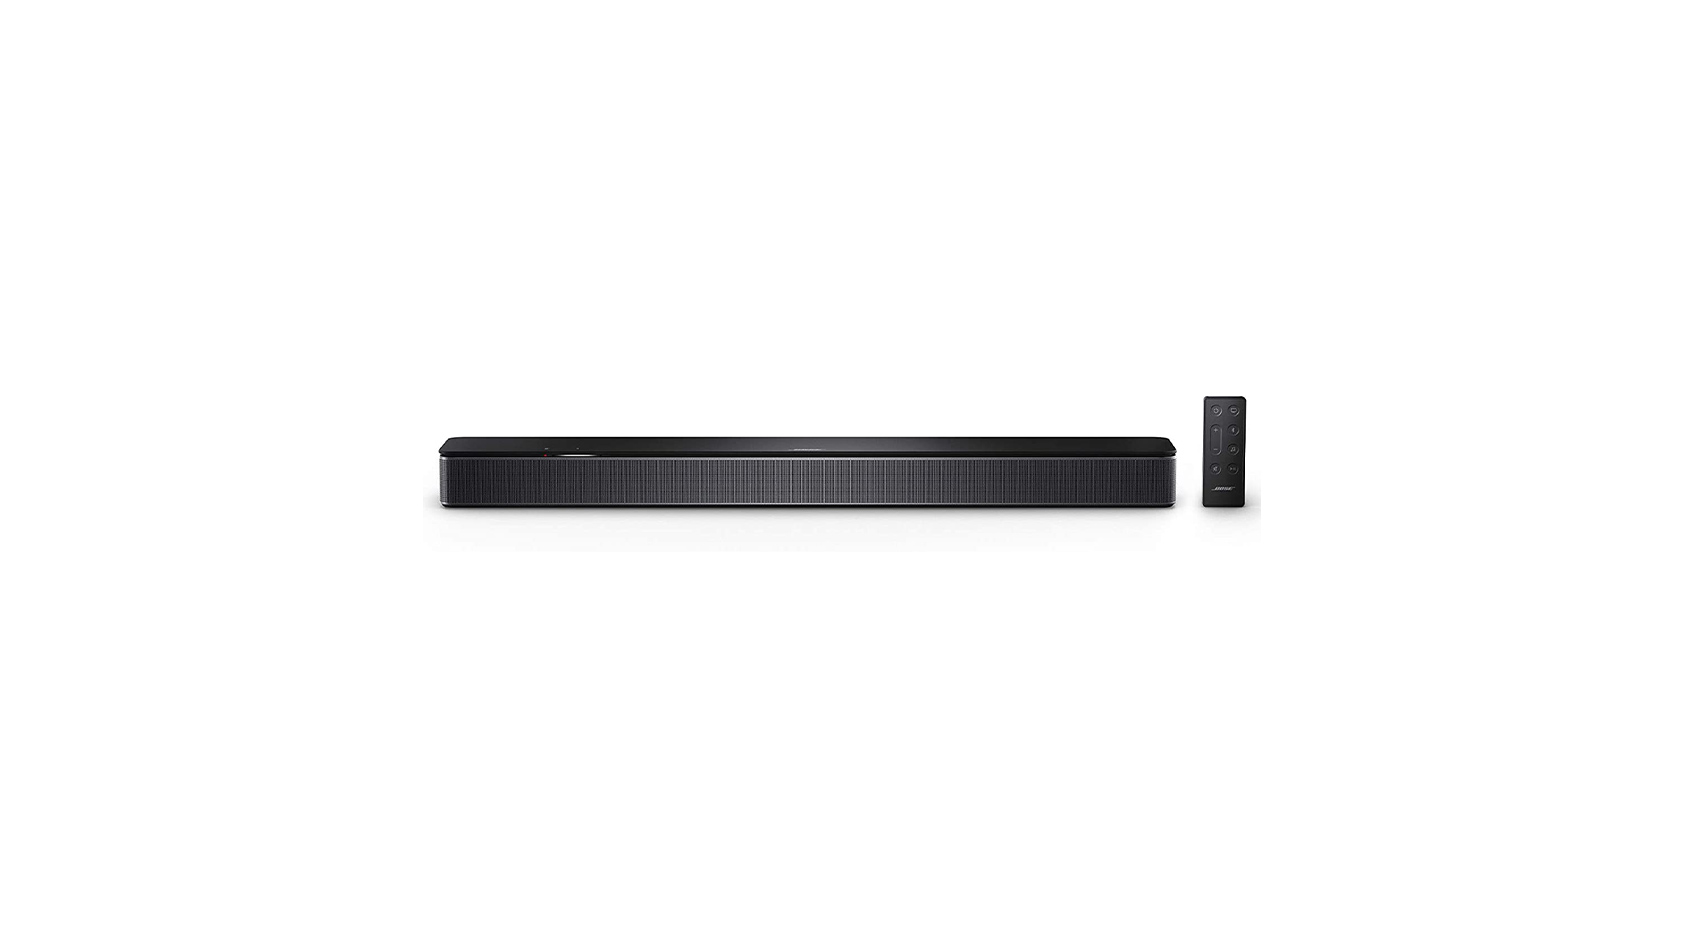 The Bose Smart Soundbar and remote in black against a white background.